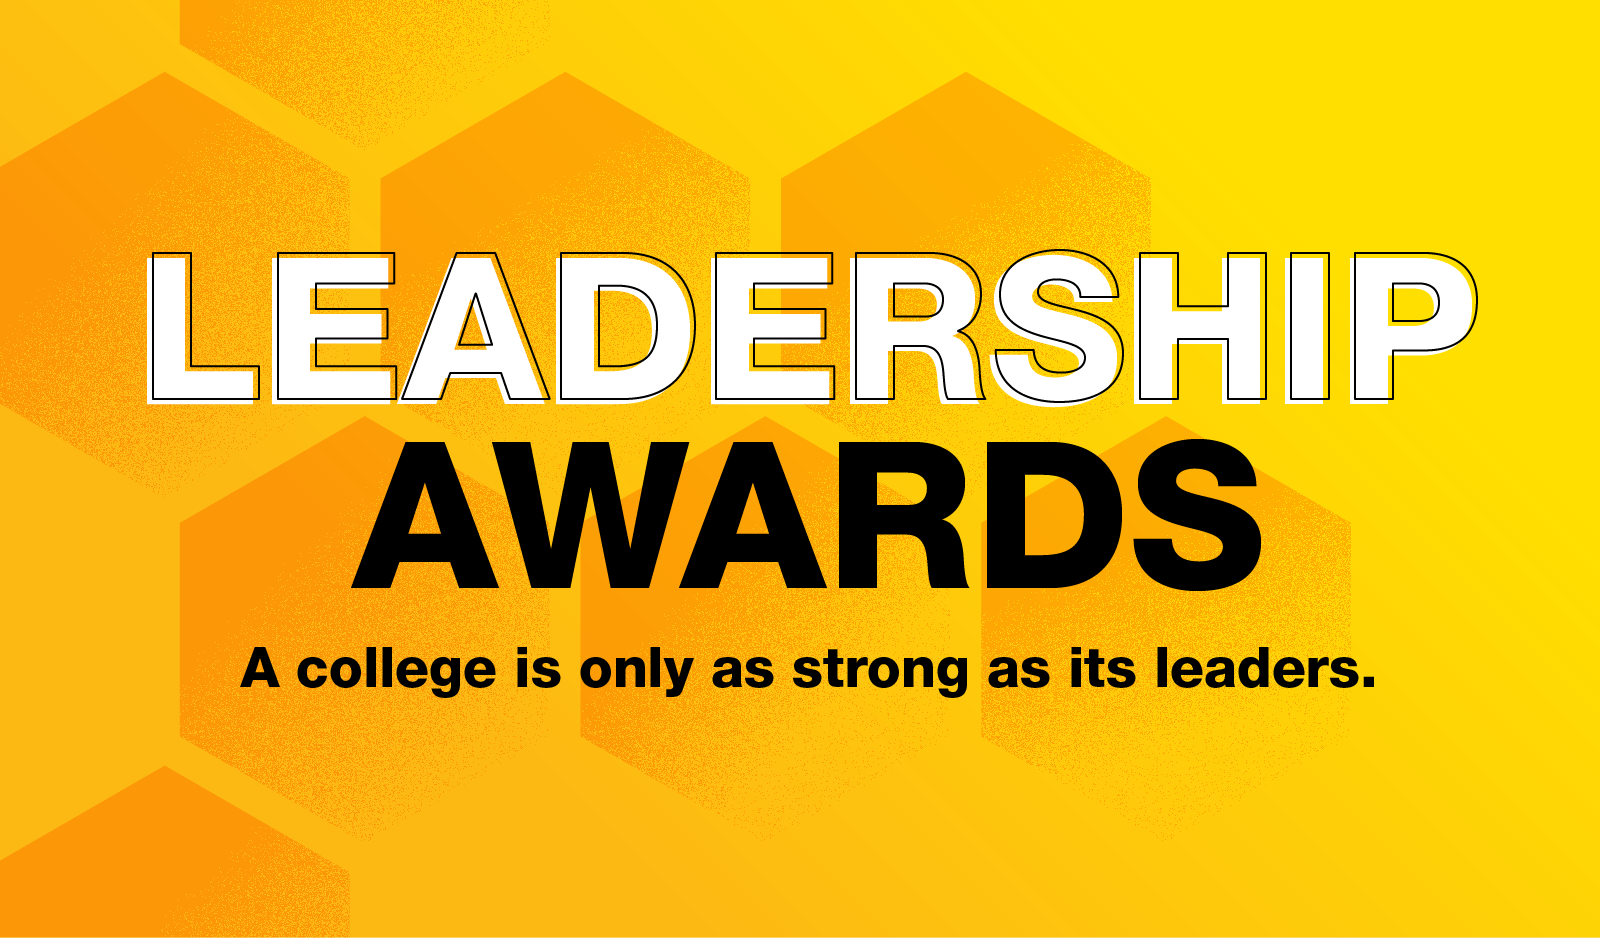 Leadership awards. A college is only as strong as its leaders.